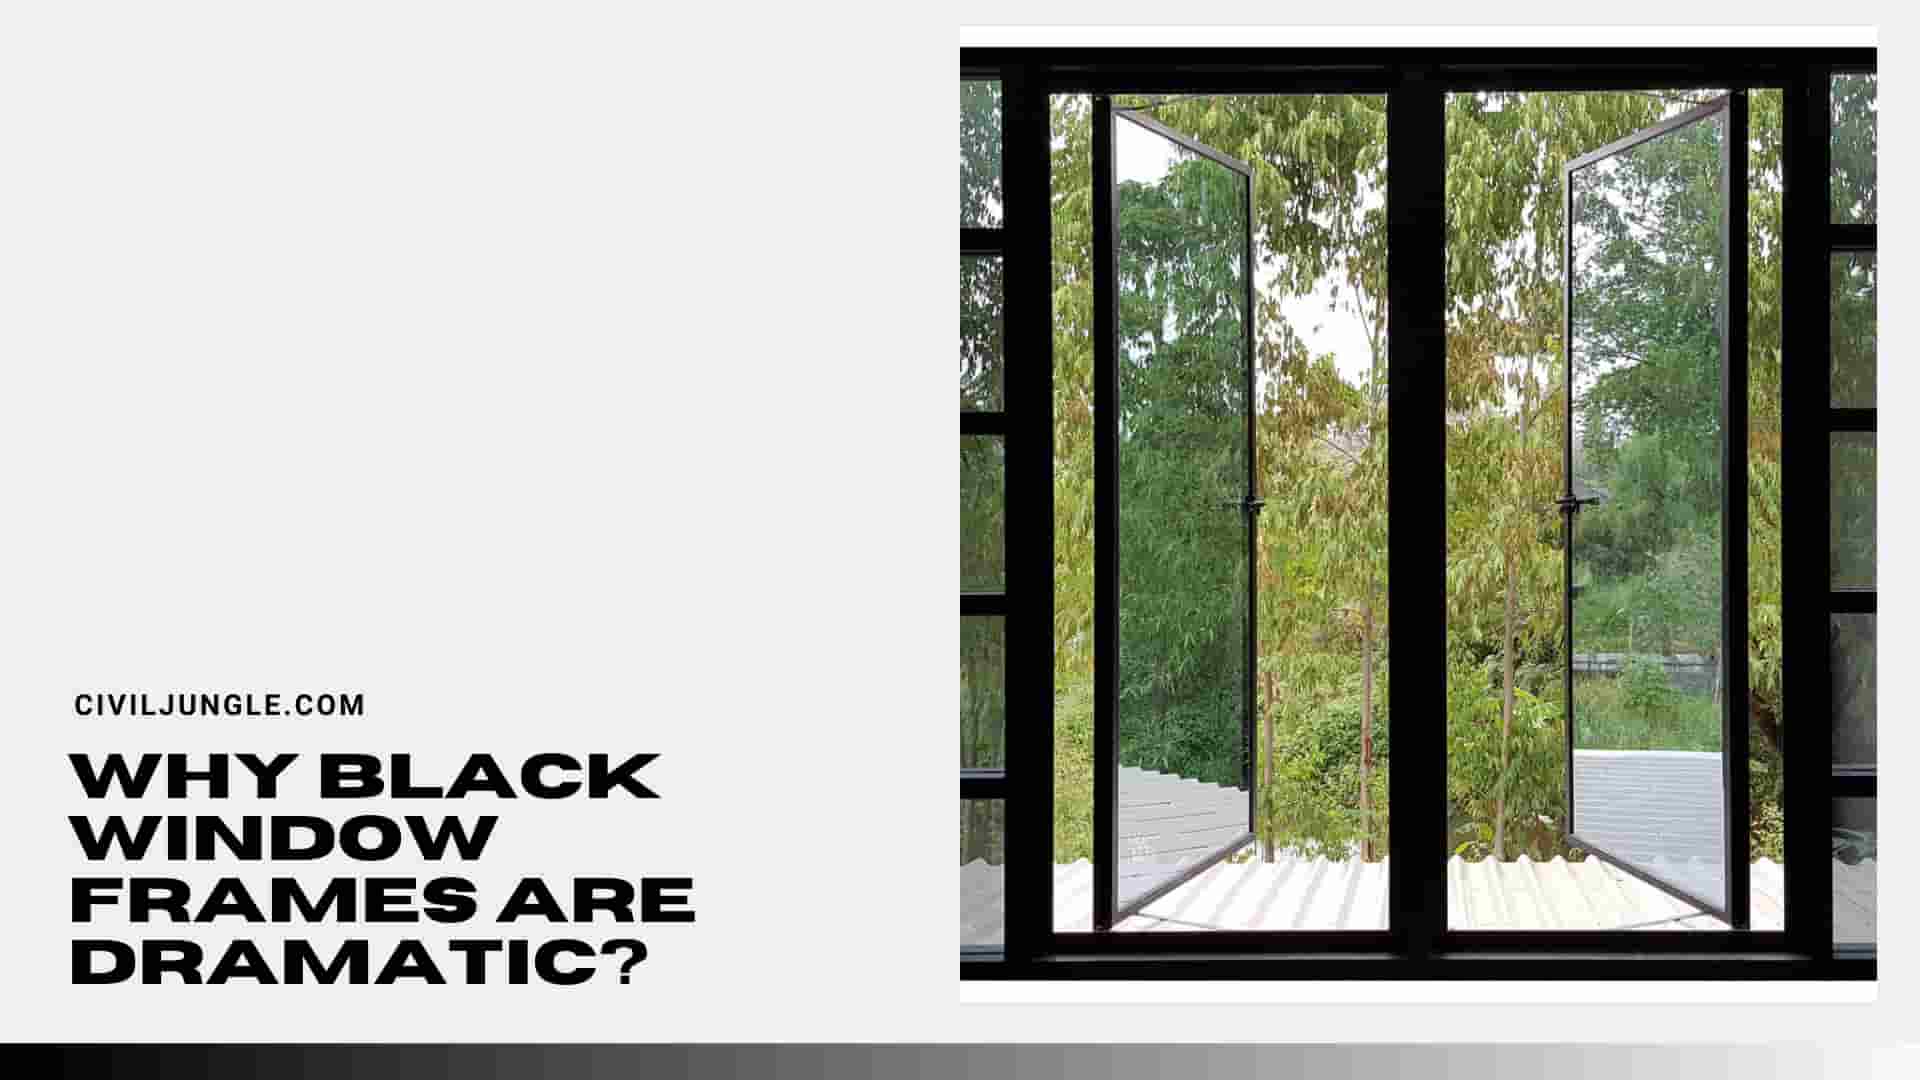 Why Black Window Frames Are Dramatic?